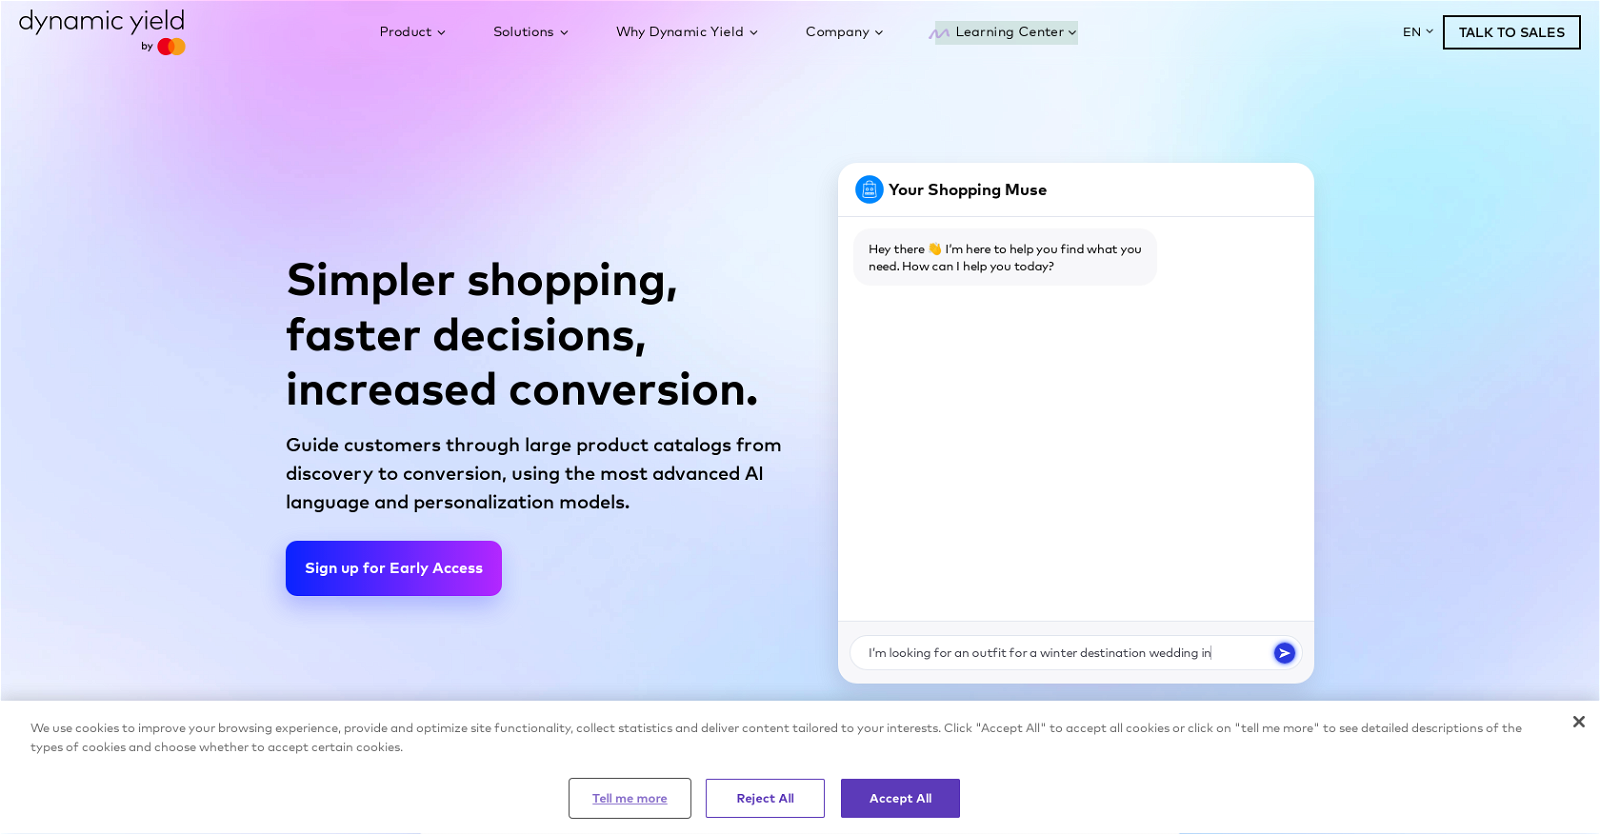 Shopping Muse by Dynamic Yield website